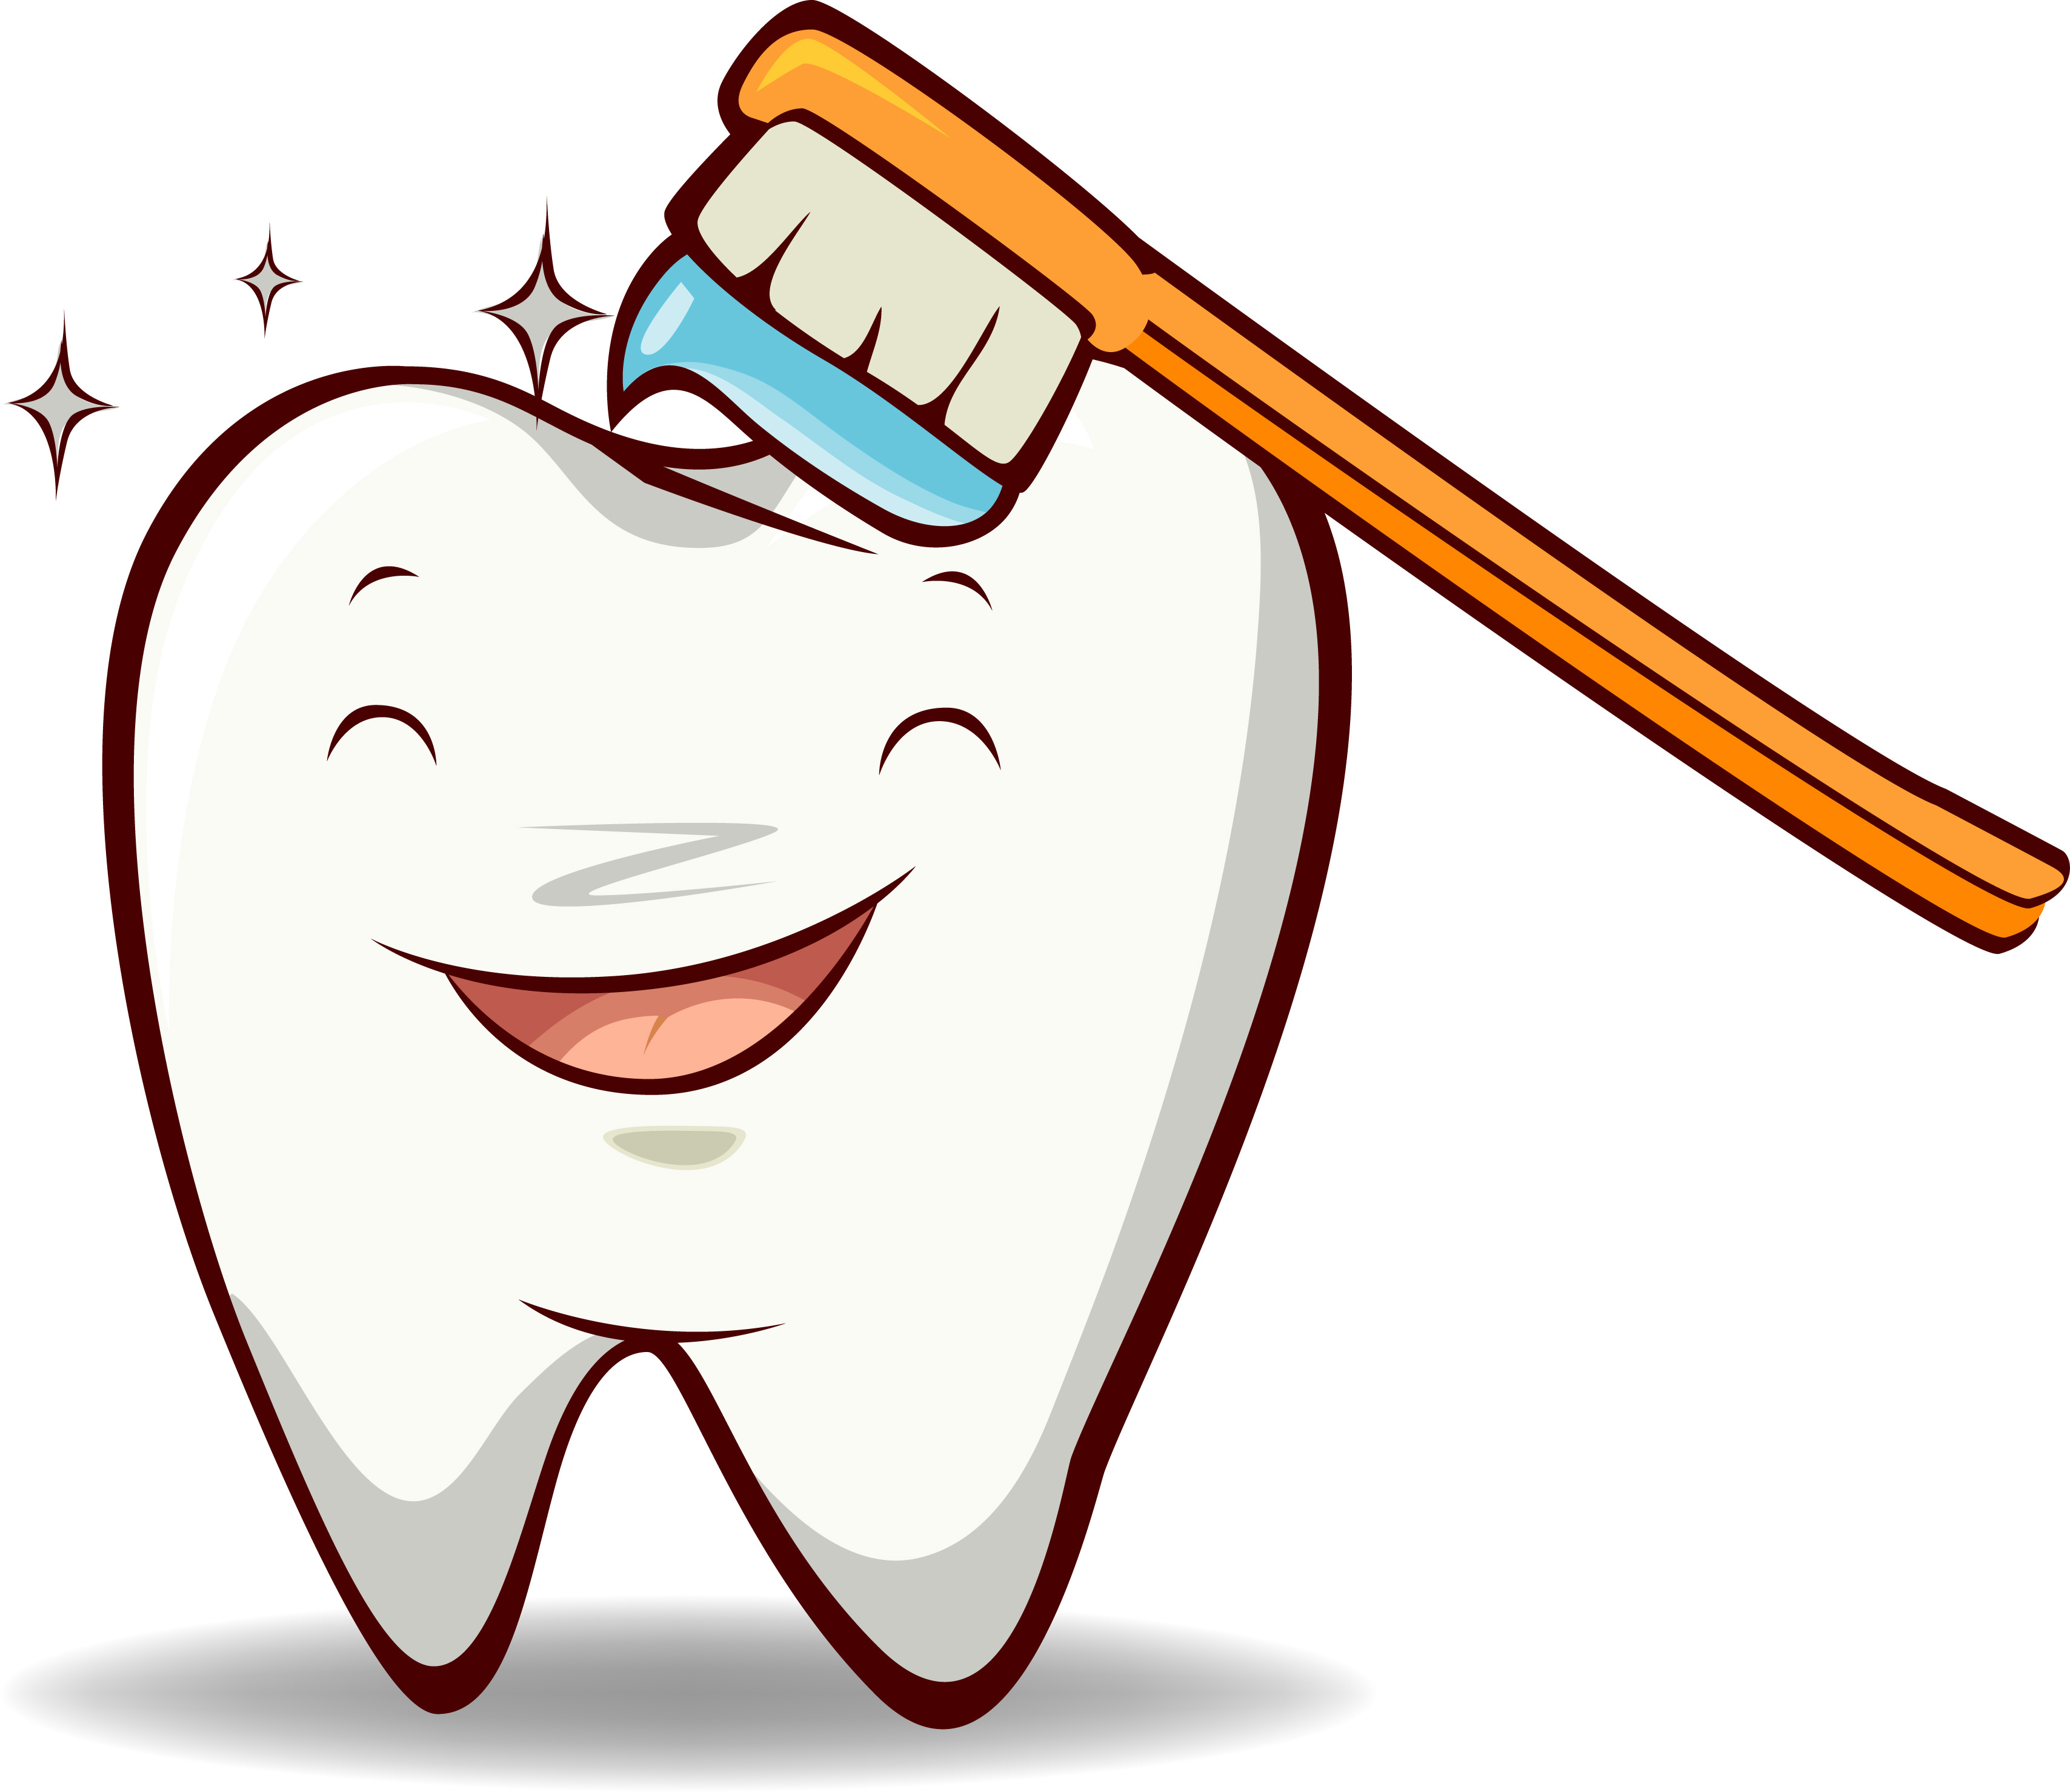 Tooth Power Point Backgrounds, Tooth Download Power Point ...